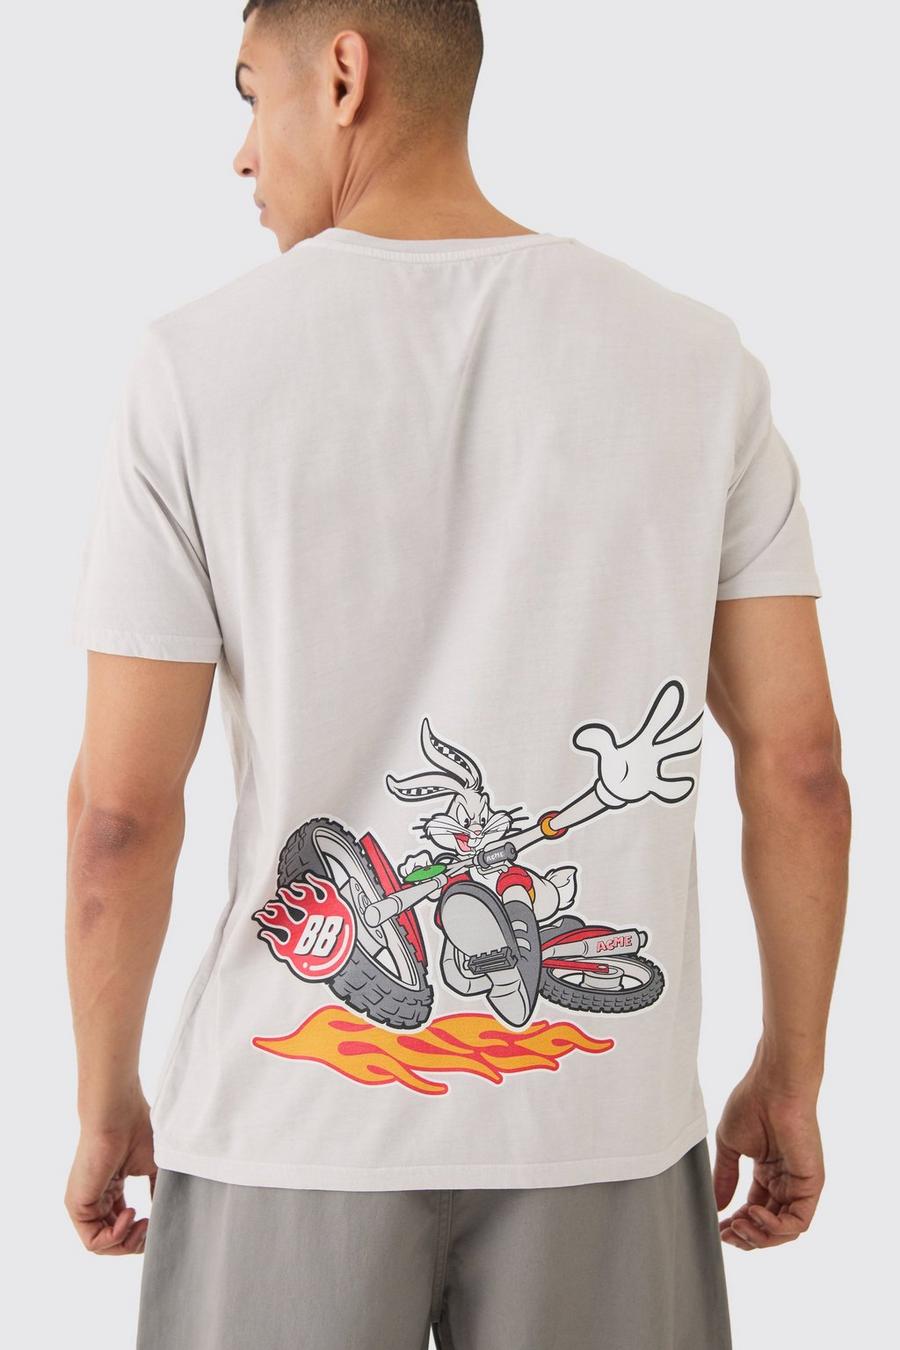 T-shirt oversize ufficiale dei Looney Tunes in lavaggio Bugs Bunny, Stone image number 1